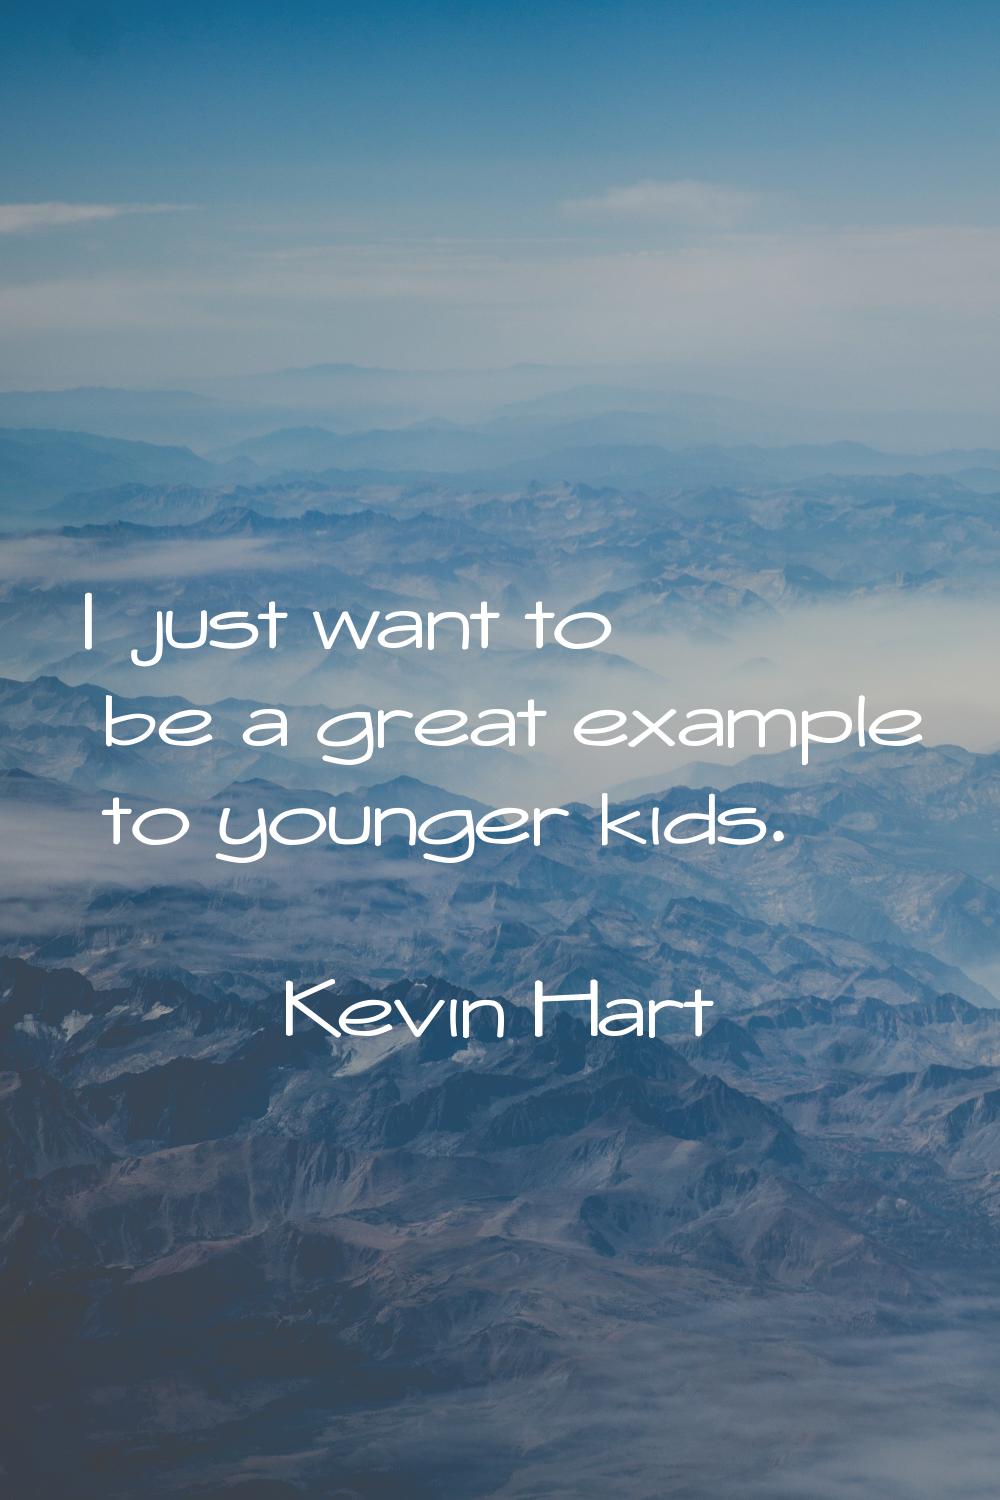 I just want to be a great example to younger kids.